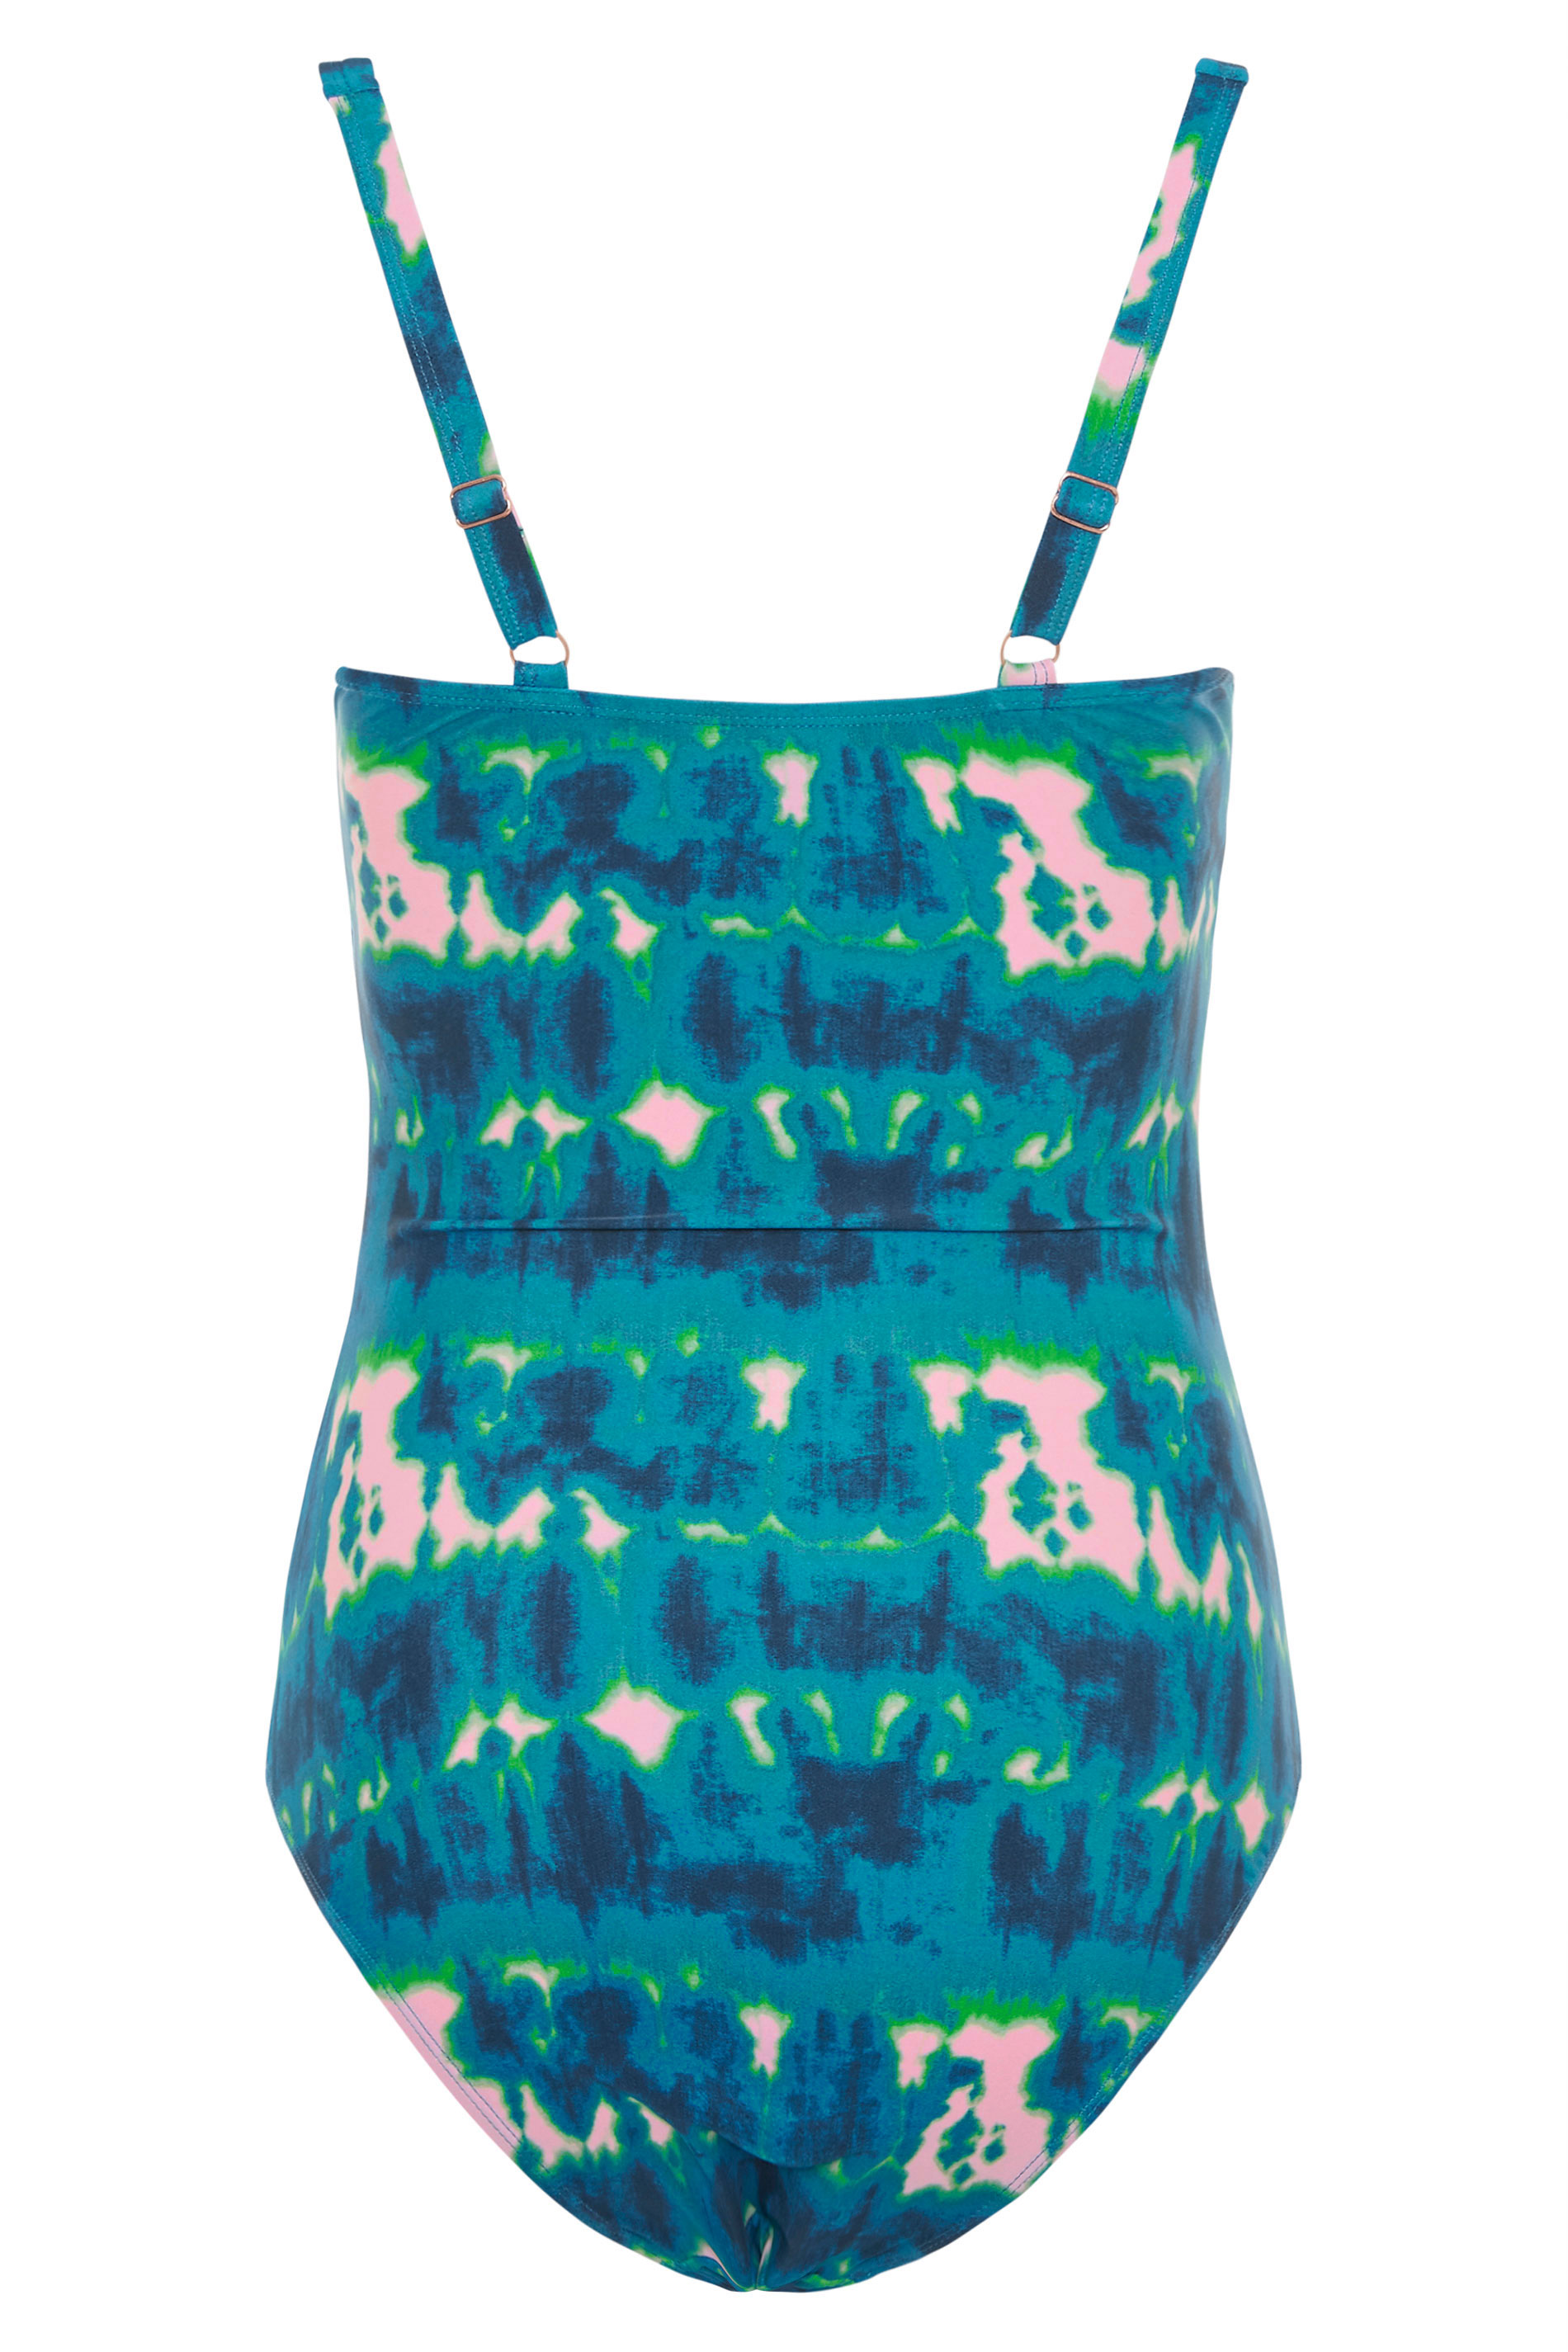 LTS Teal Blue Tie Dye Ruched Swimsuit | Long Tall Sally